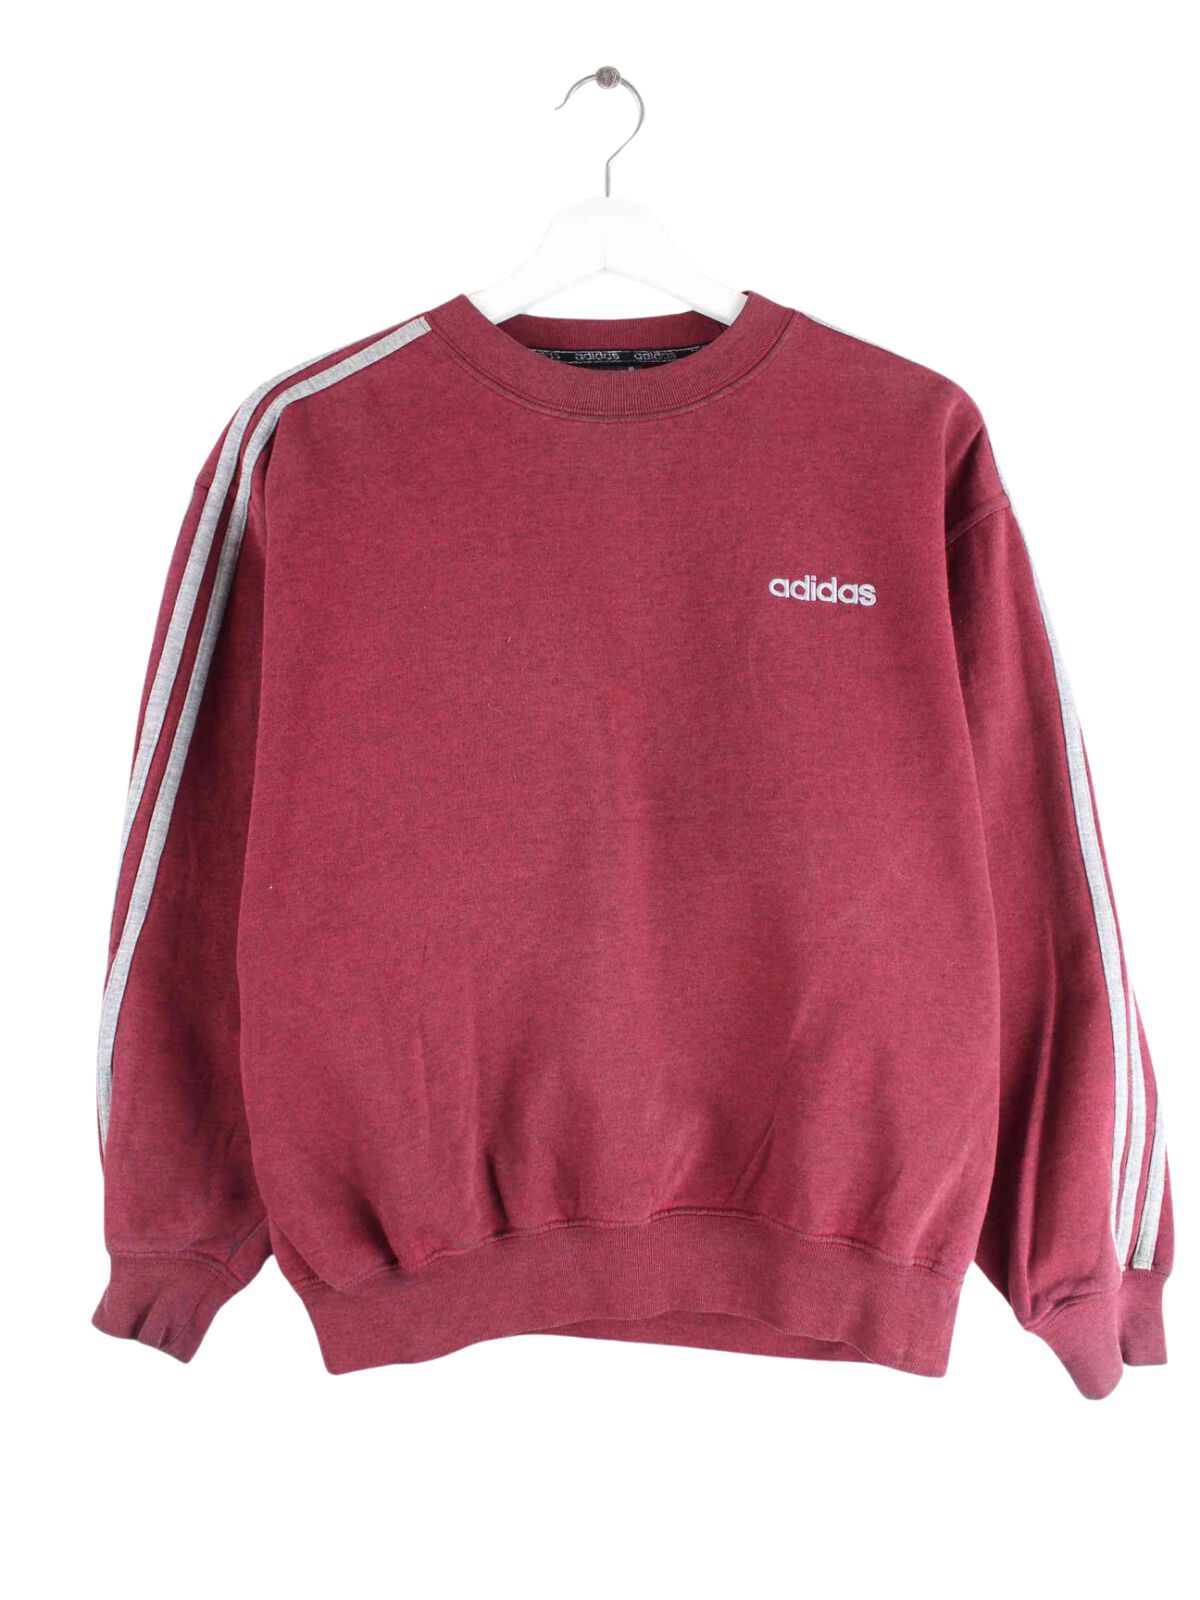 Adidas 80s Vintage 3-Stripes Sweater Rot XS (front image)